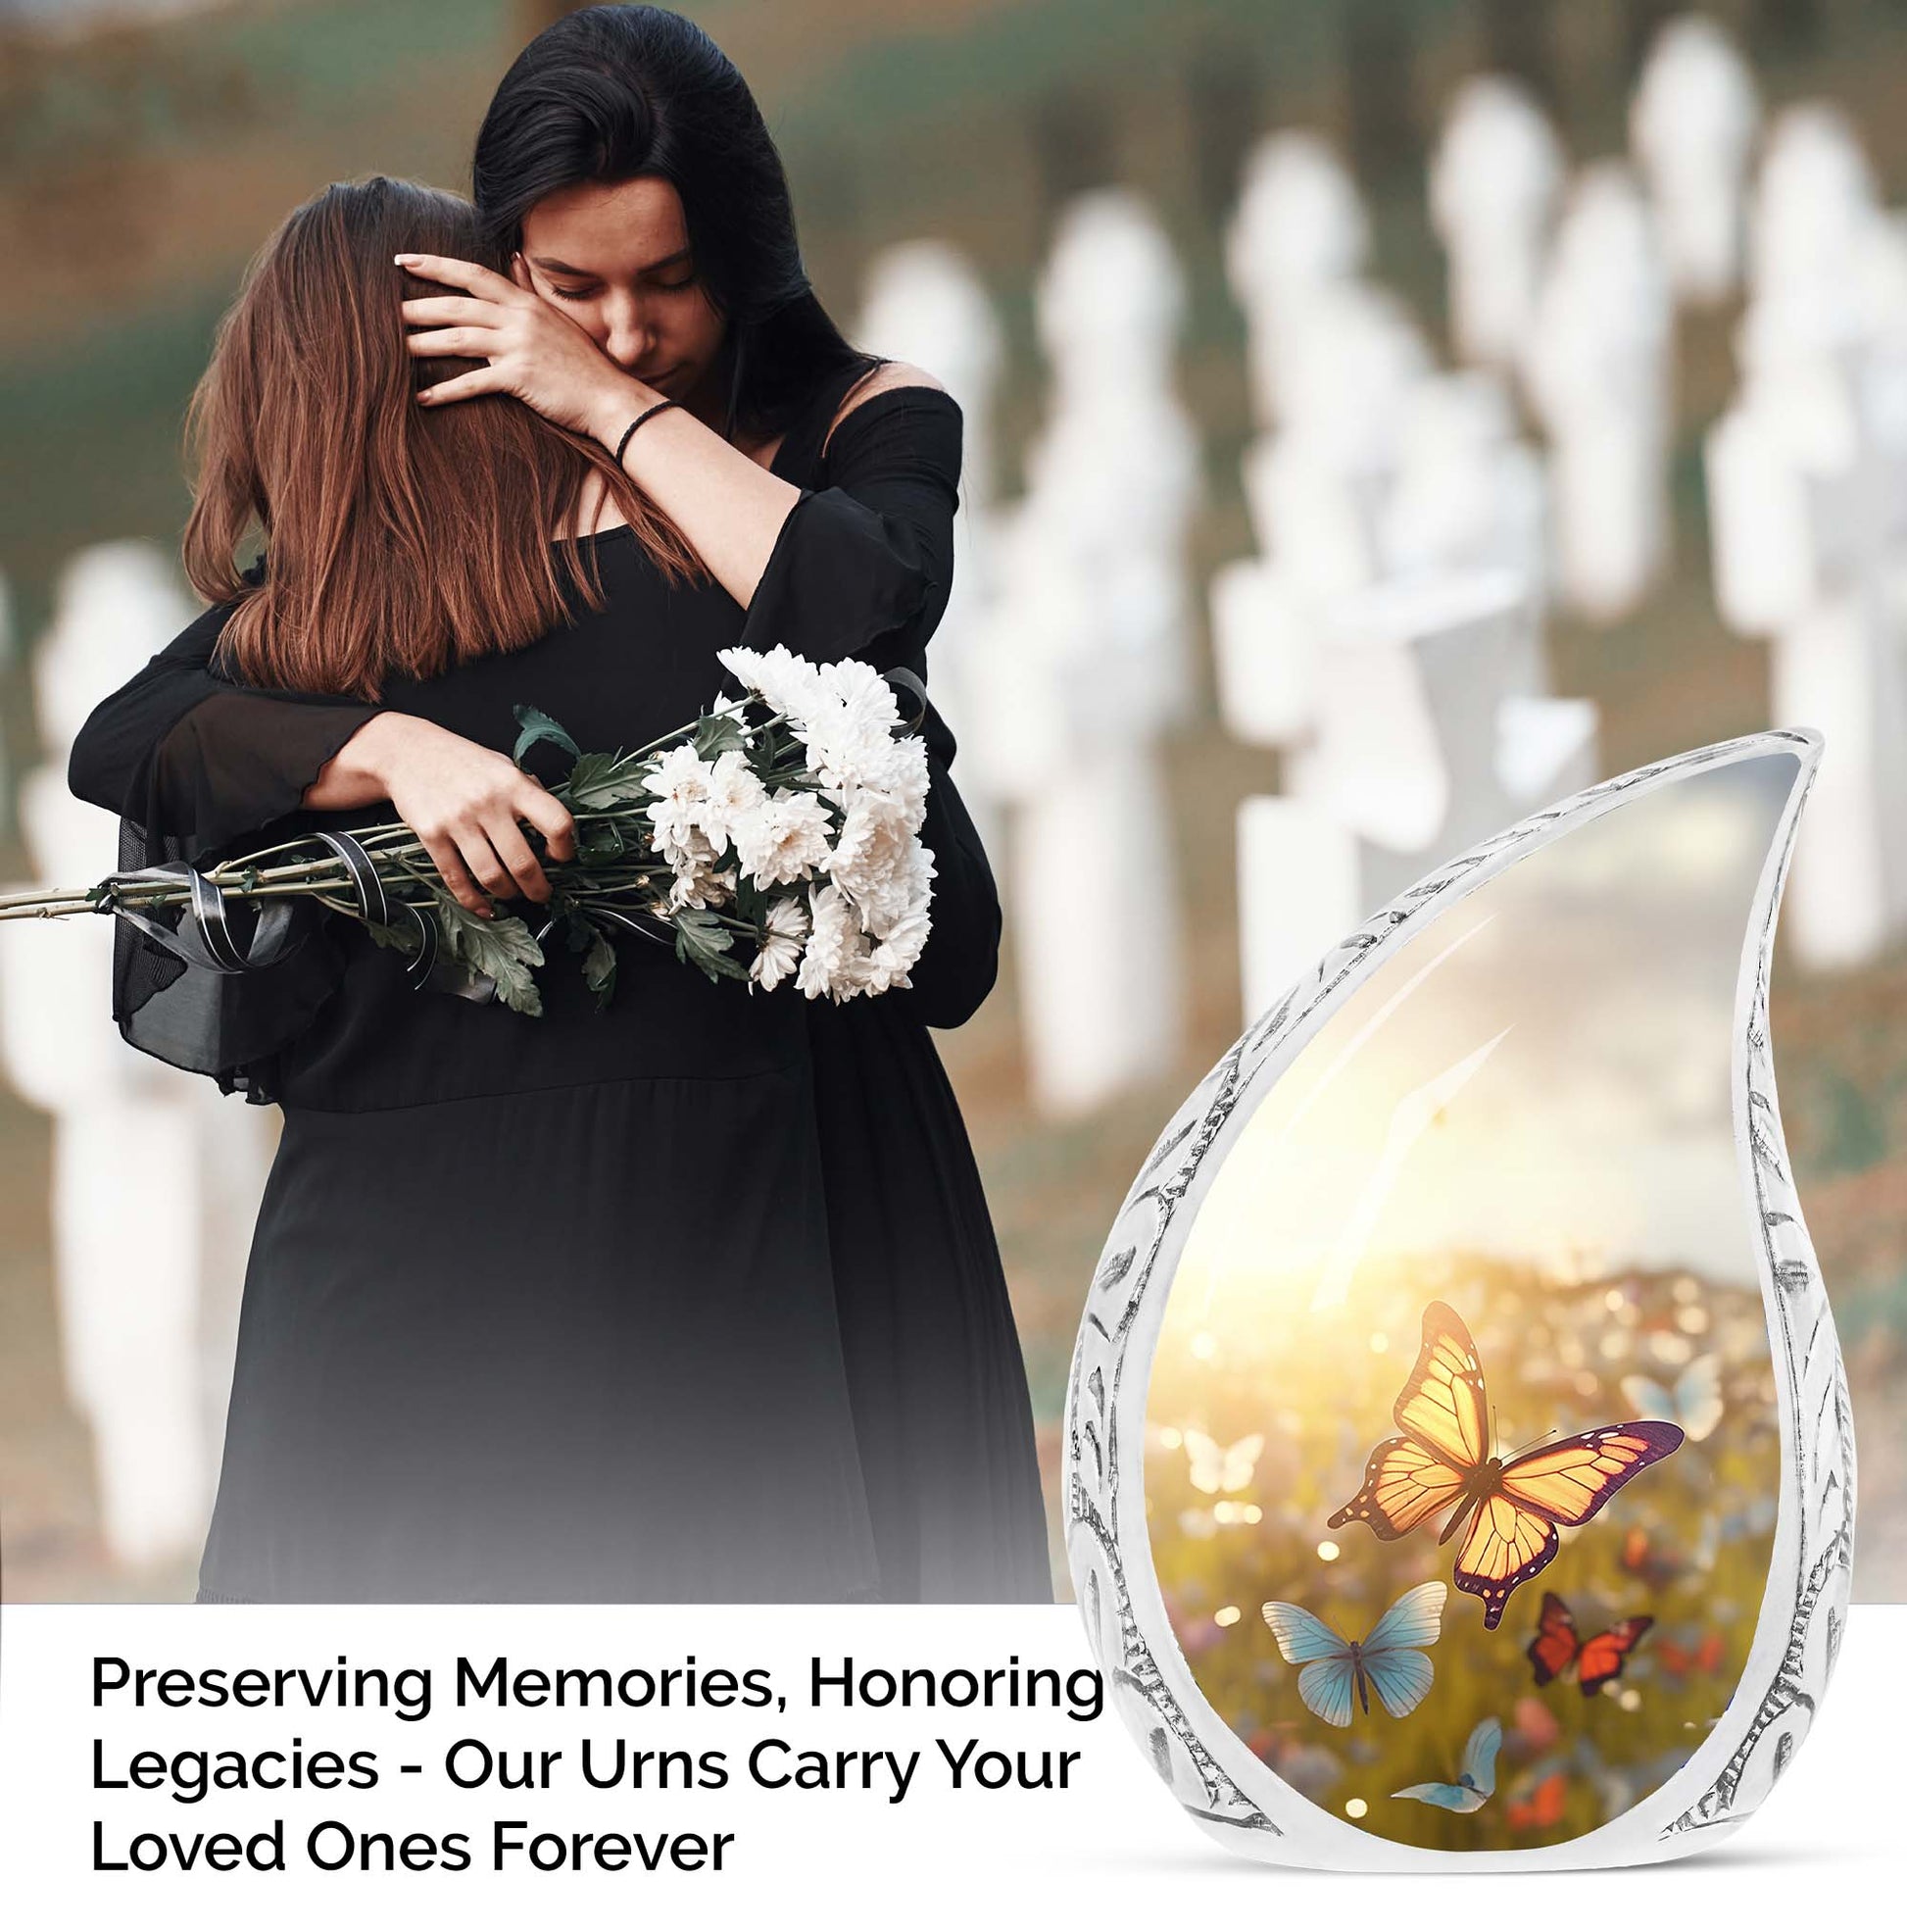 Large urn ornately designed with butterflies on a sunset meadow, ideal for human ashes adult female burial or cremation